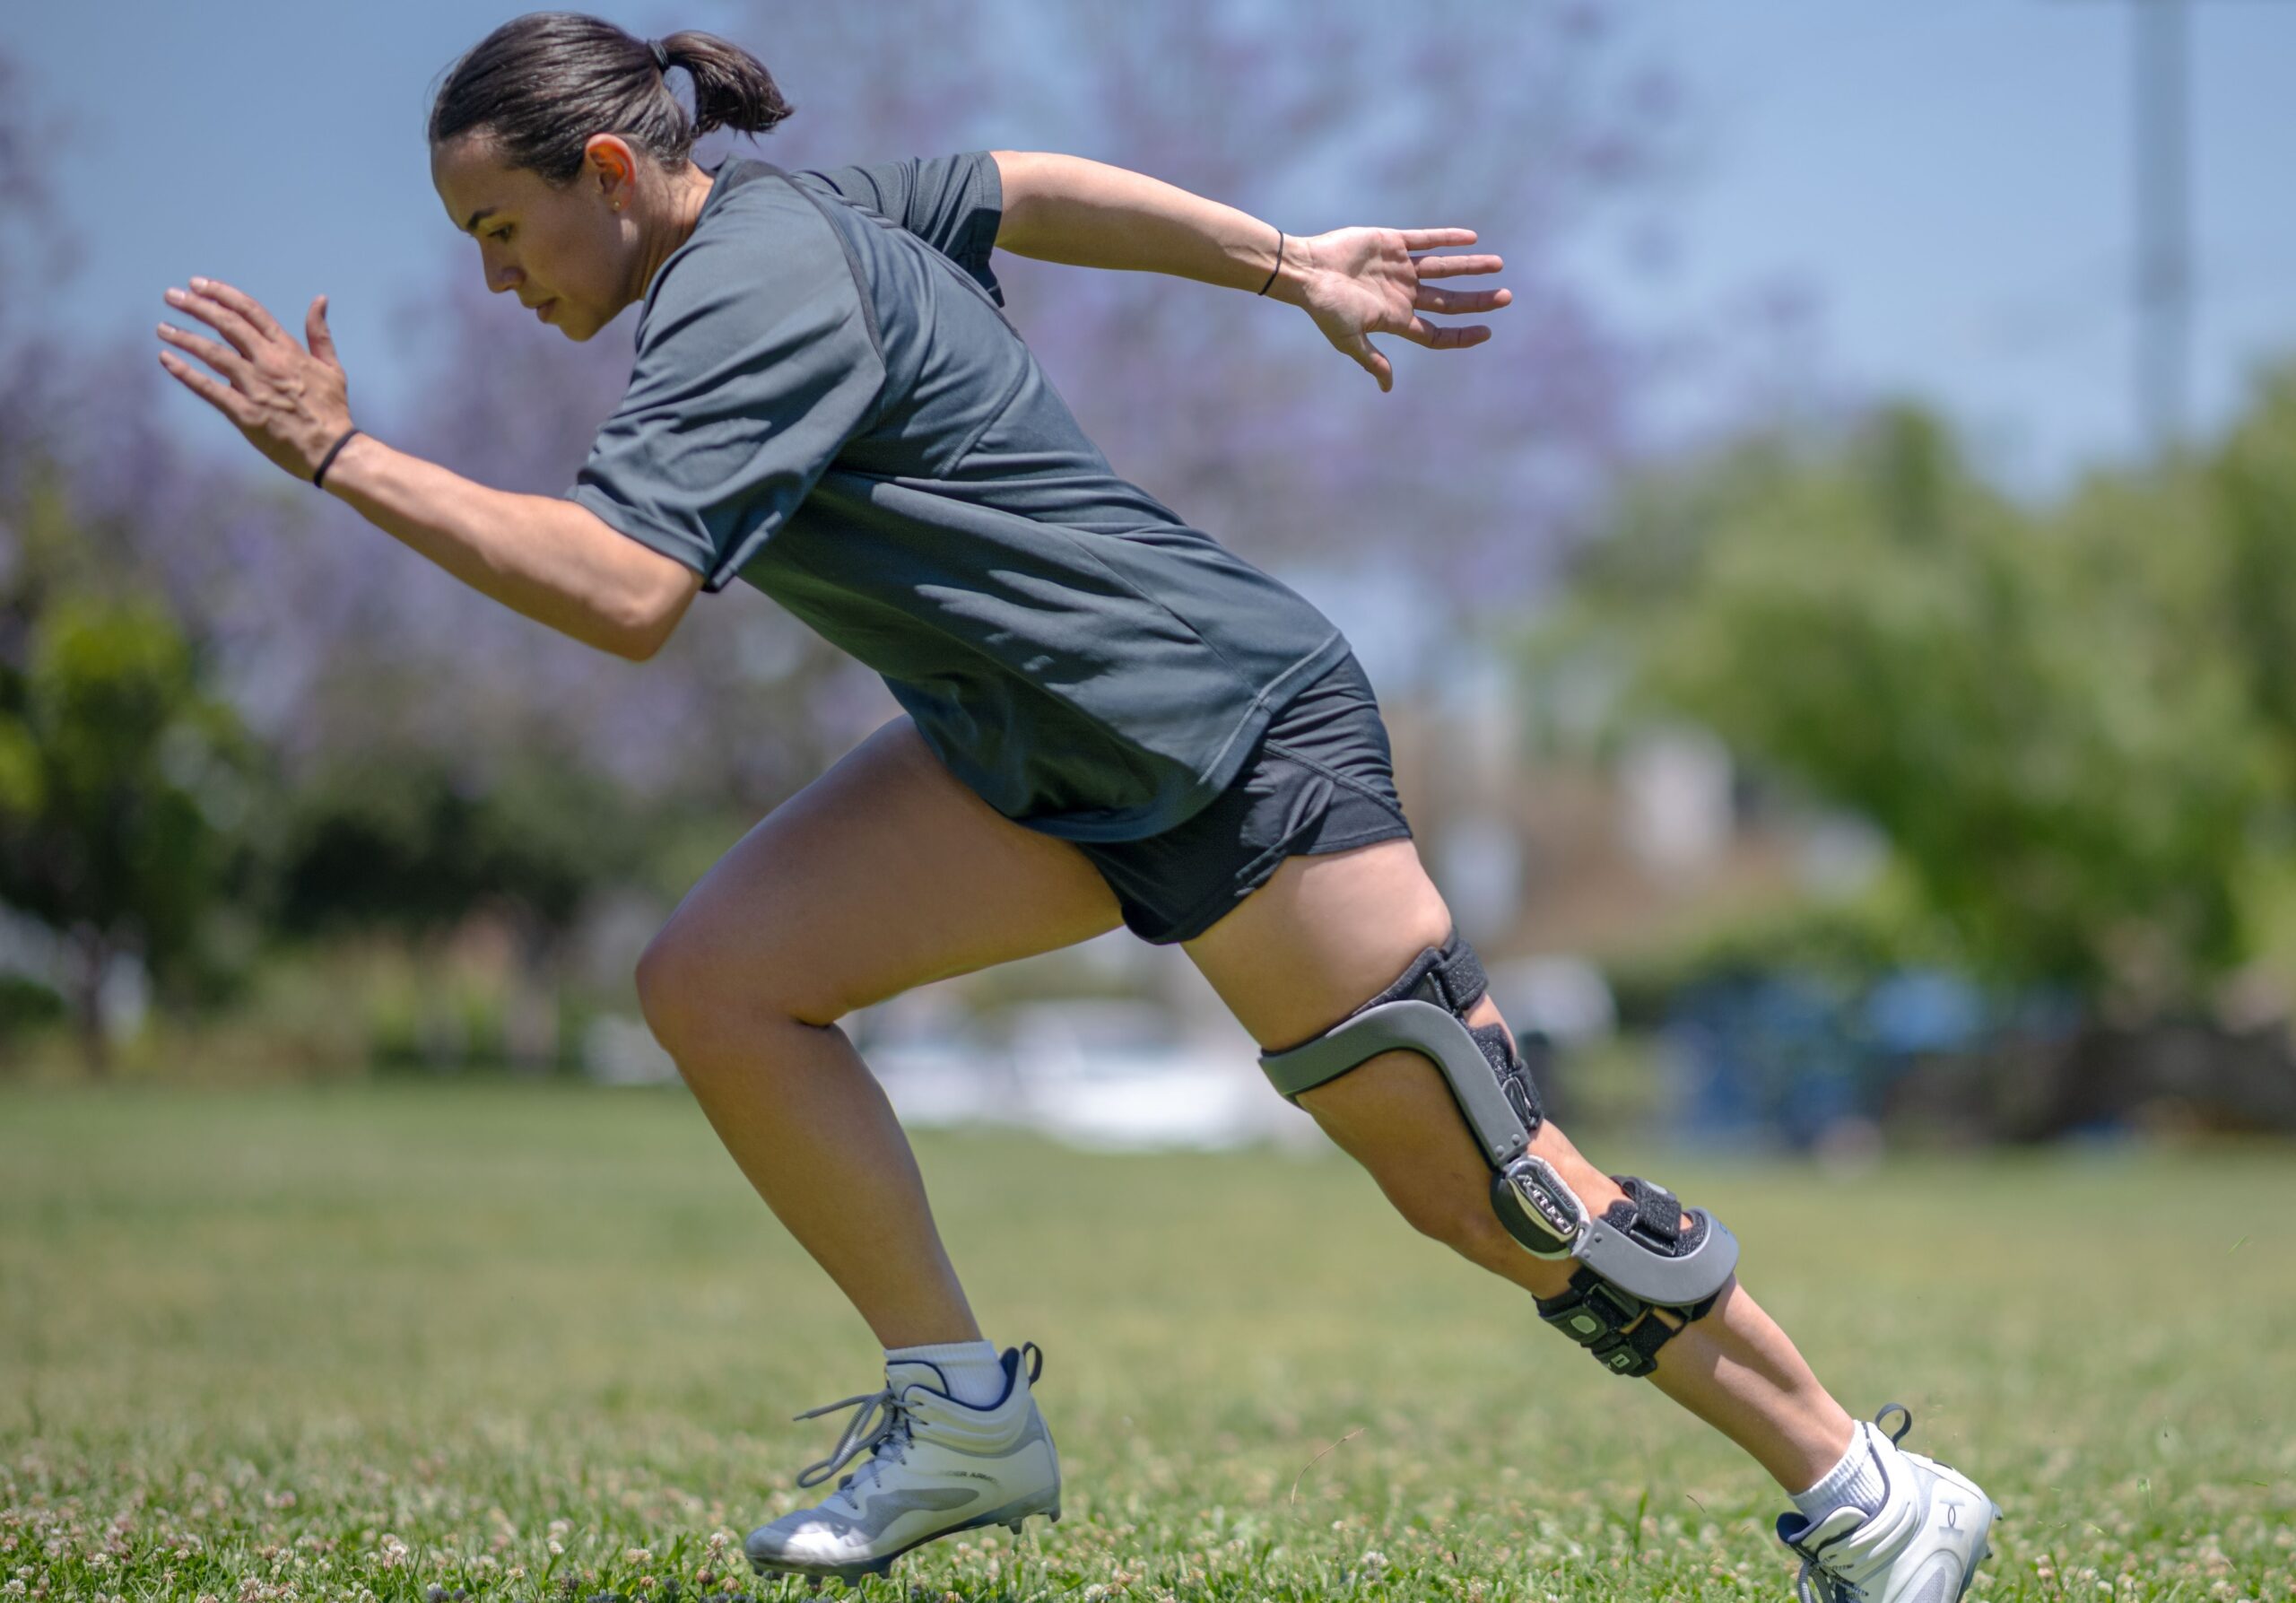 Sports and Orthopaedic Solutions